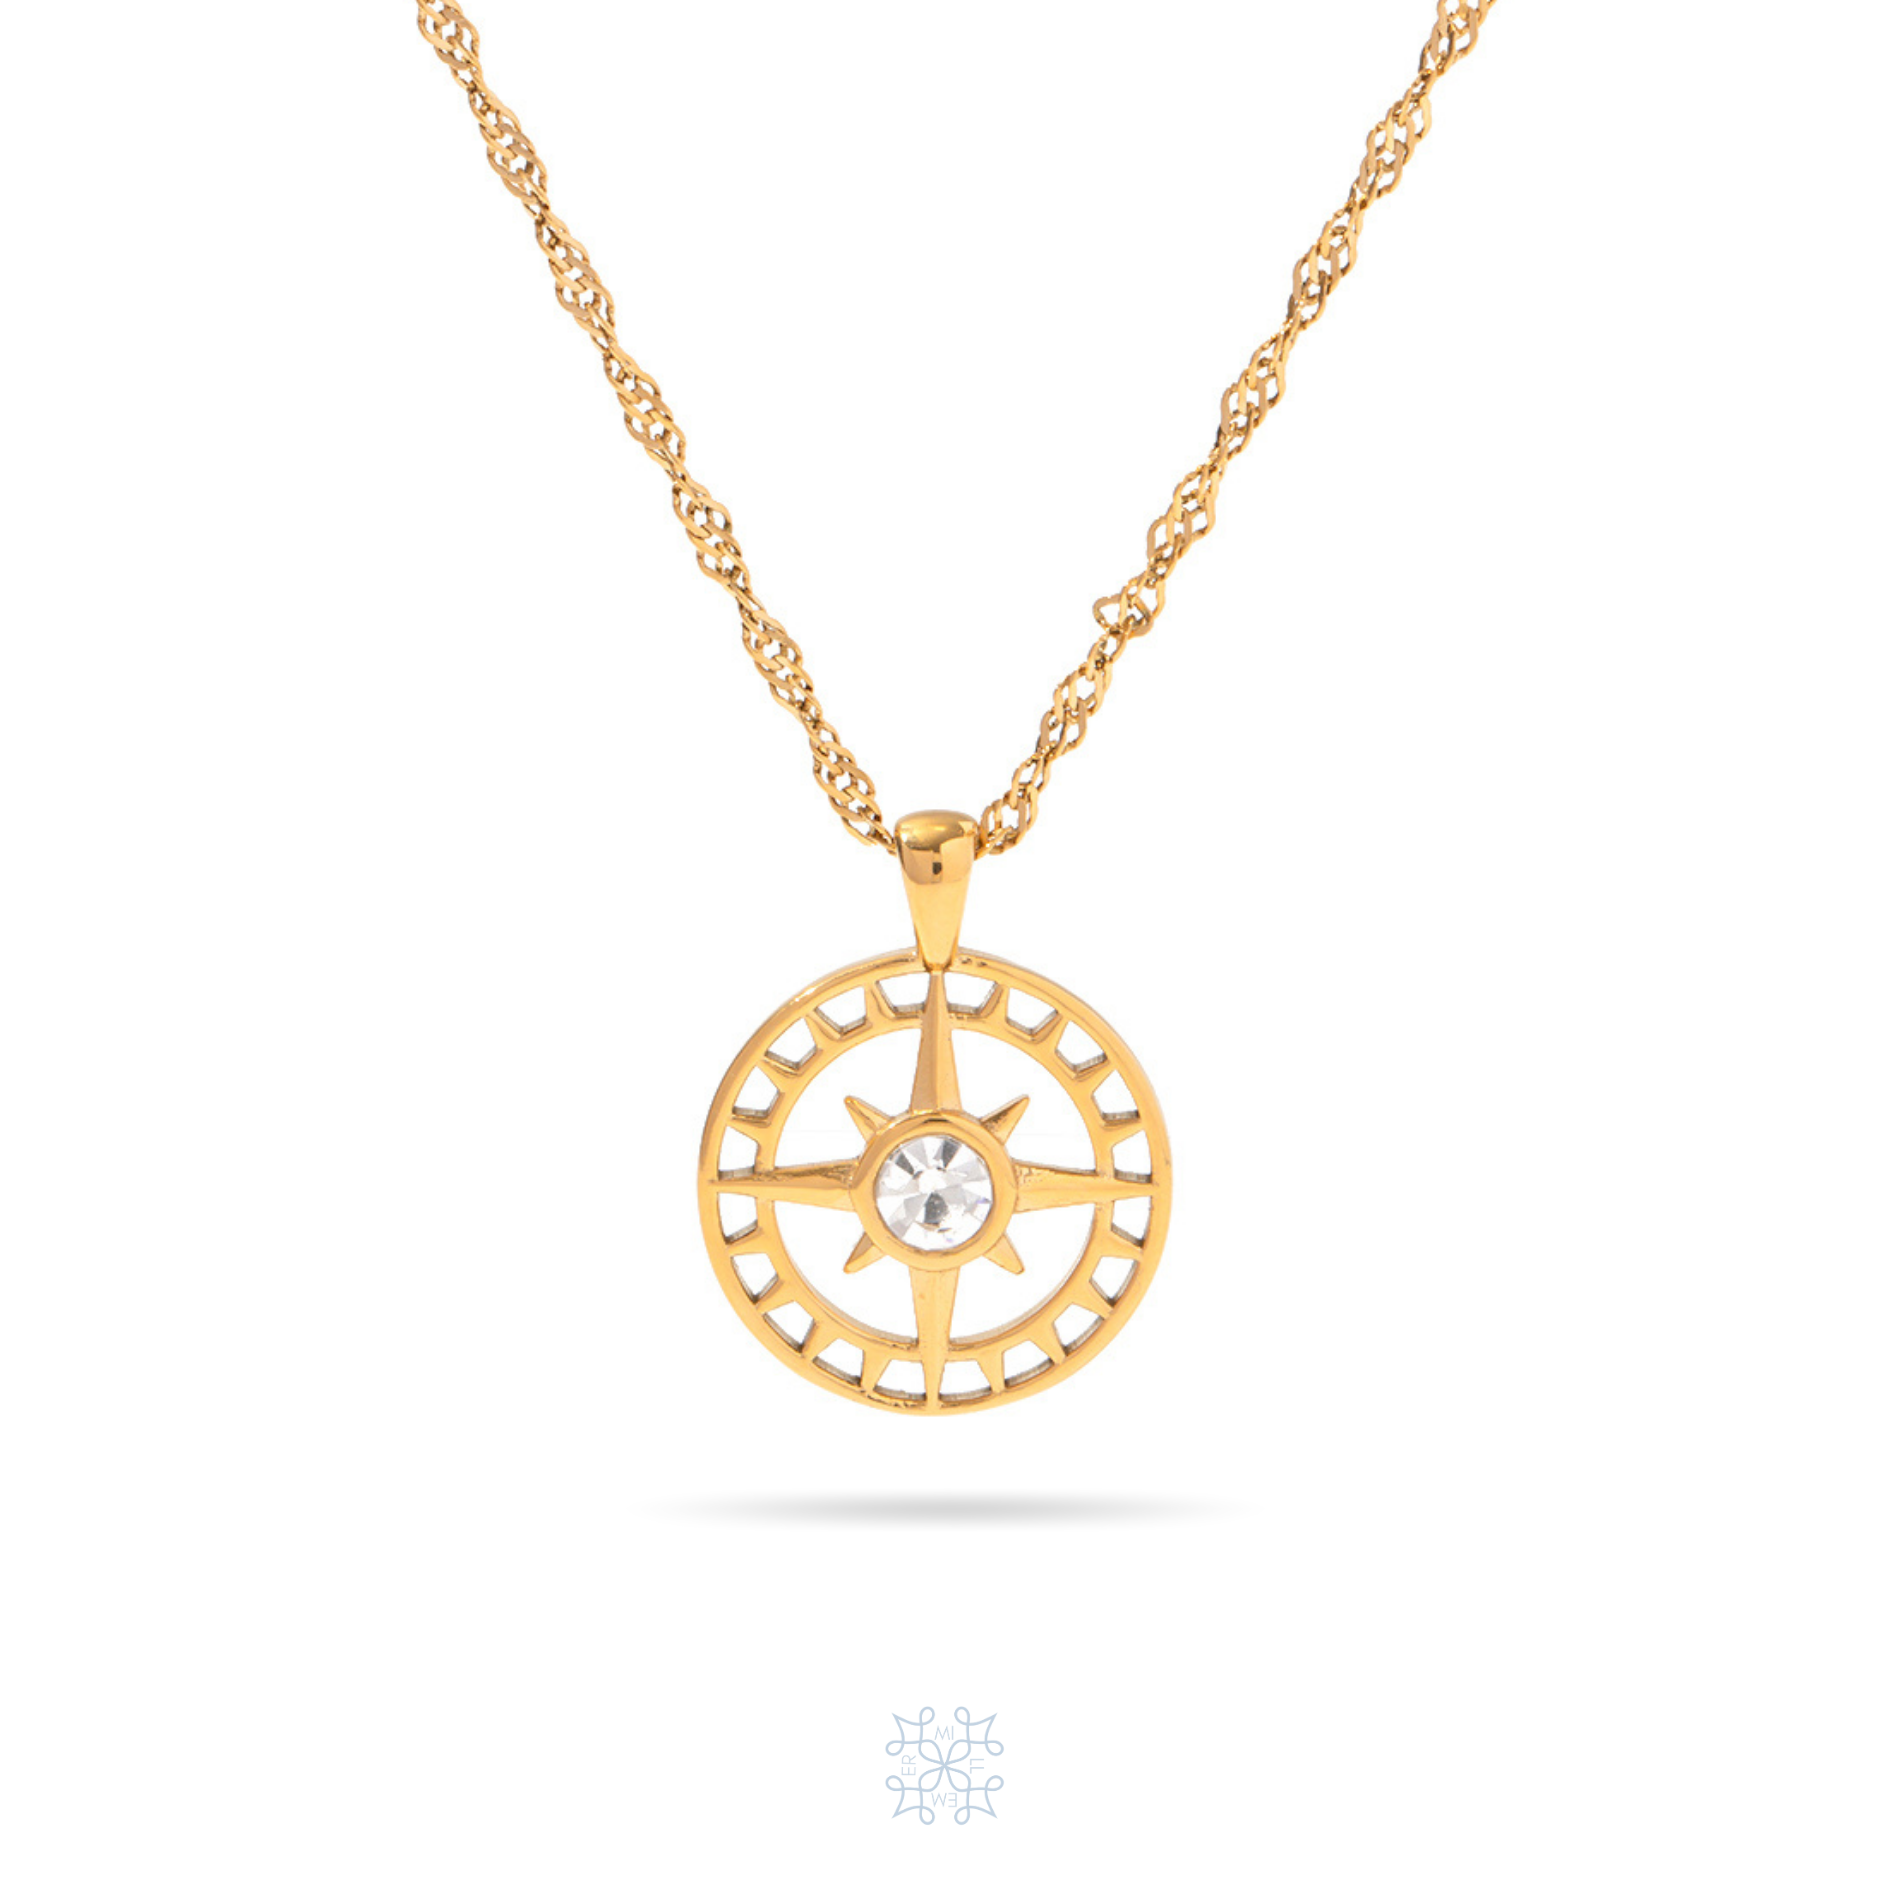 COMPASS Pendant Zircon Gold Necklace. gold chain necklace. Compass pendant with a zircon on the center of the pendant.